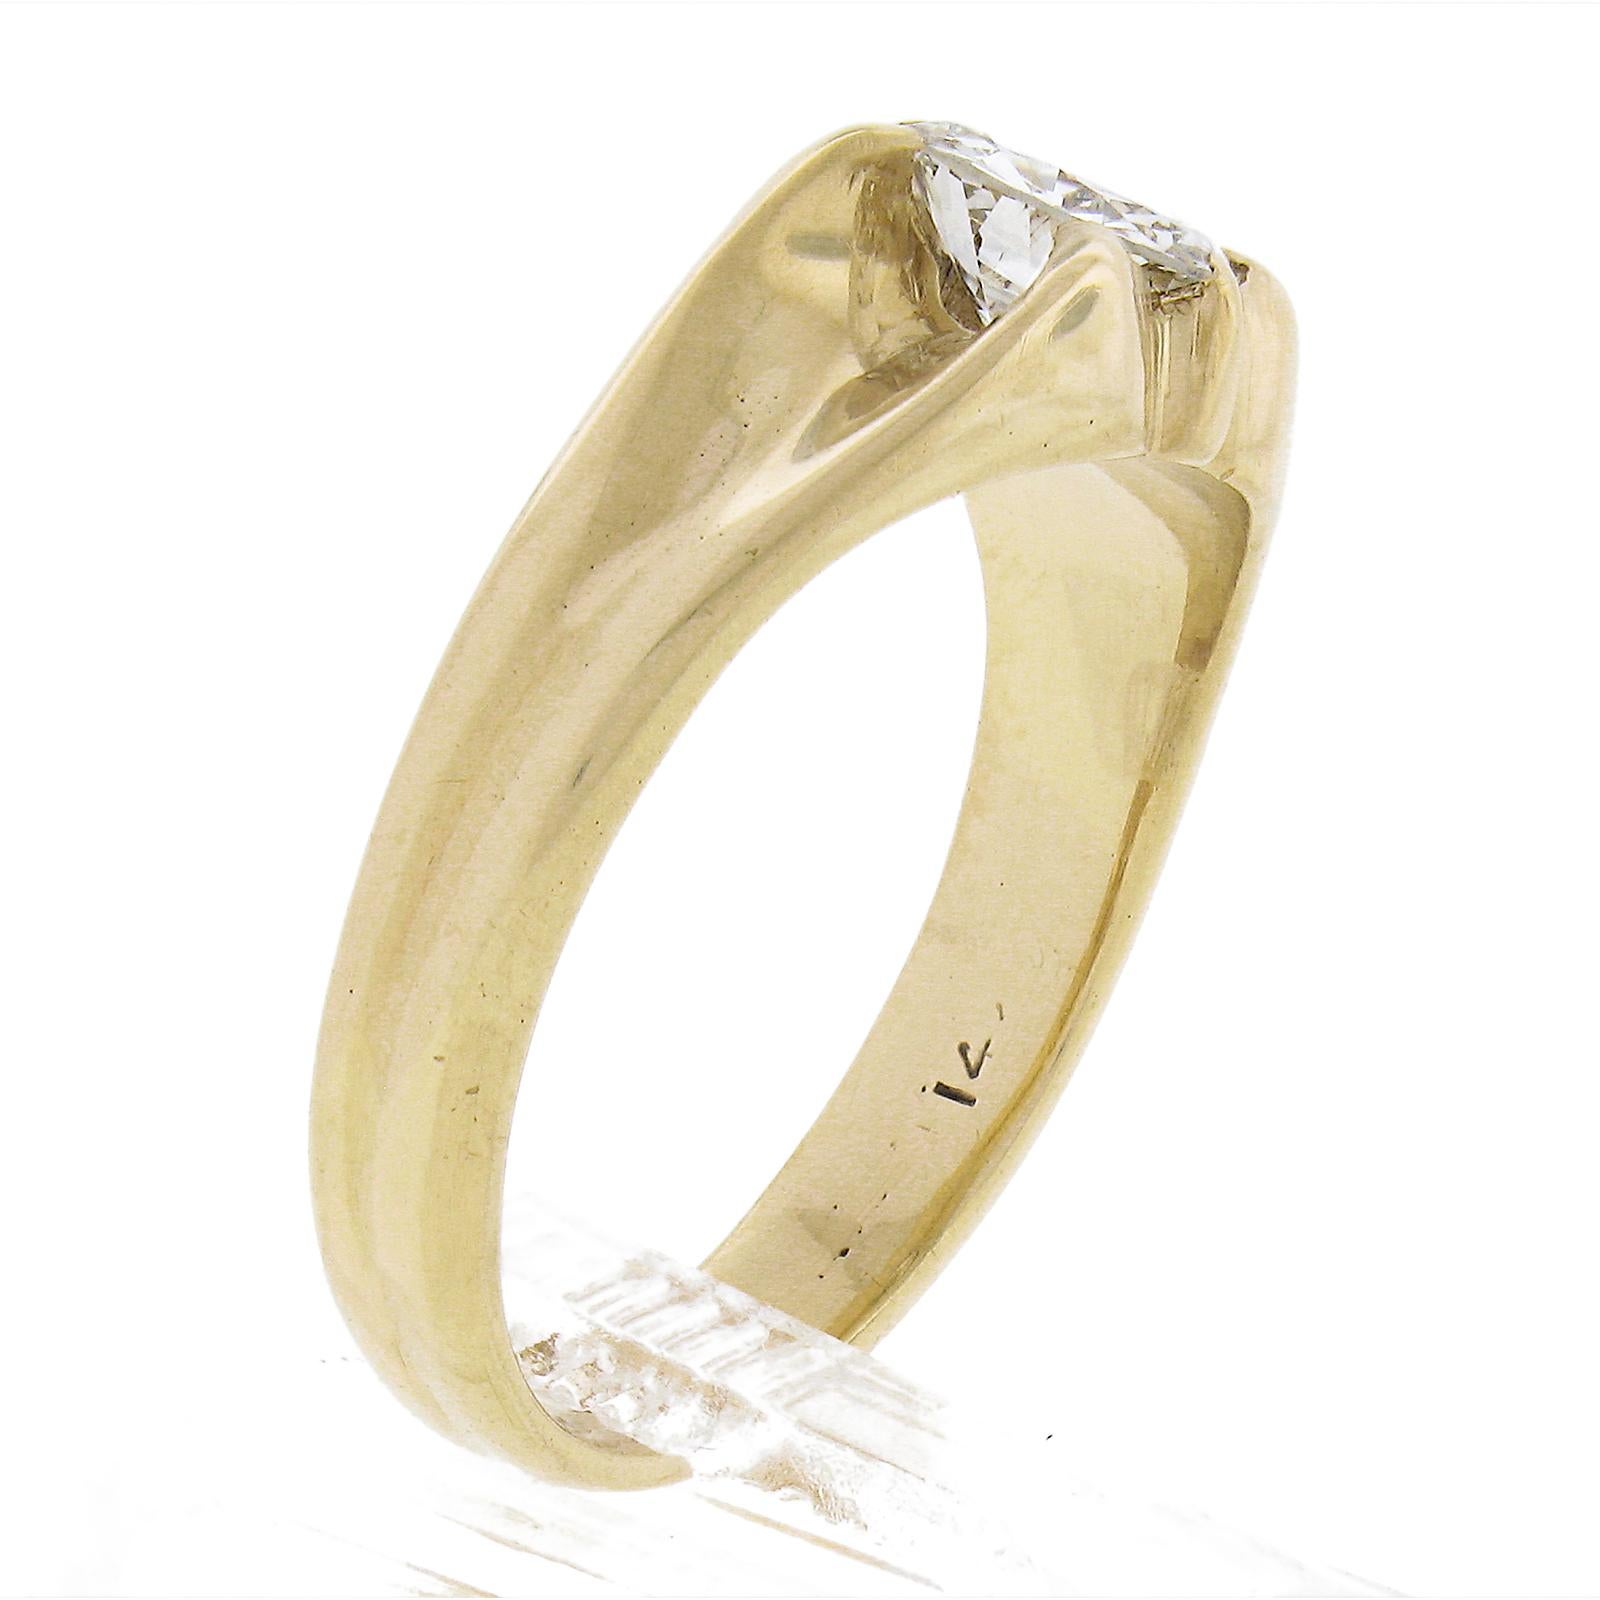 Antique 14k Gold 0.95ct GIA Certified Old Cut Belcher Diamond Engagement Ring For Sale 4